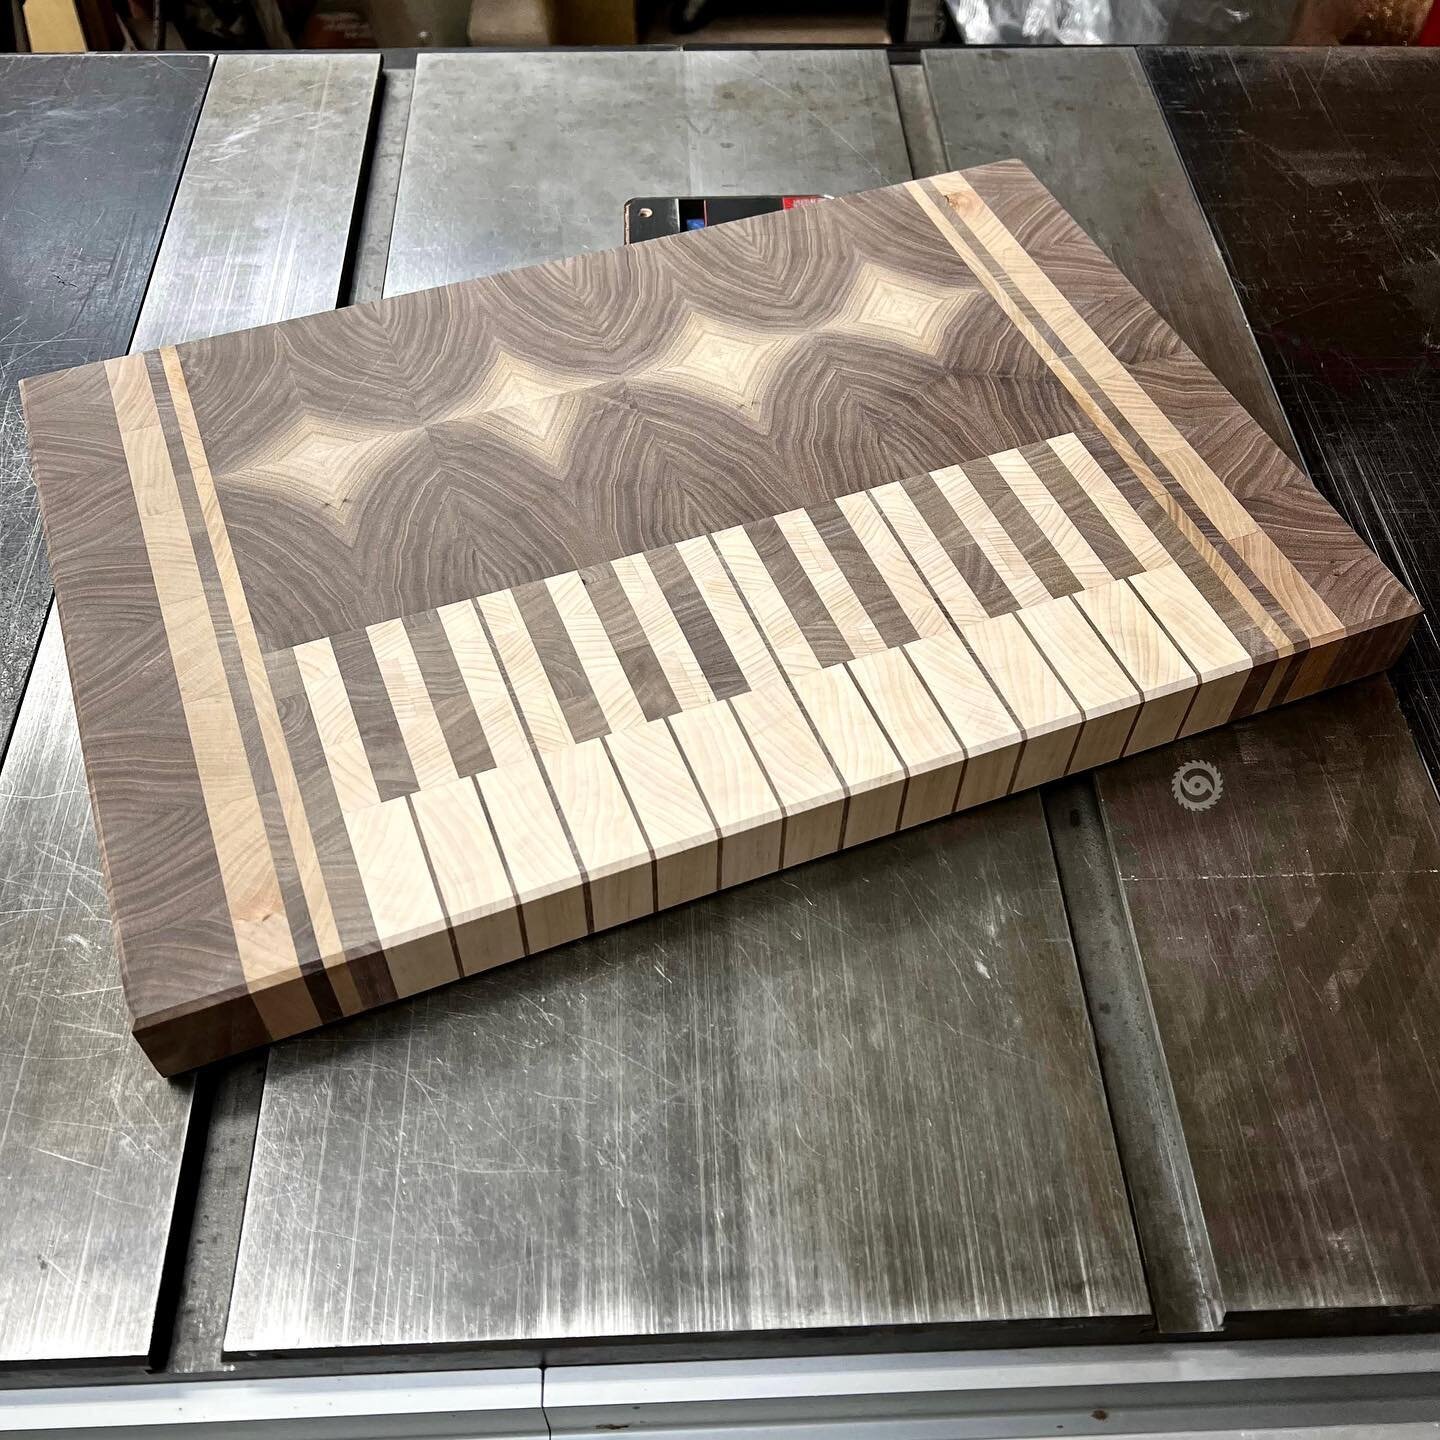 This piano end grain cutting board is getting there. Hand holds, juice groove, key-chamfer undercut, and finish sanding ahead.